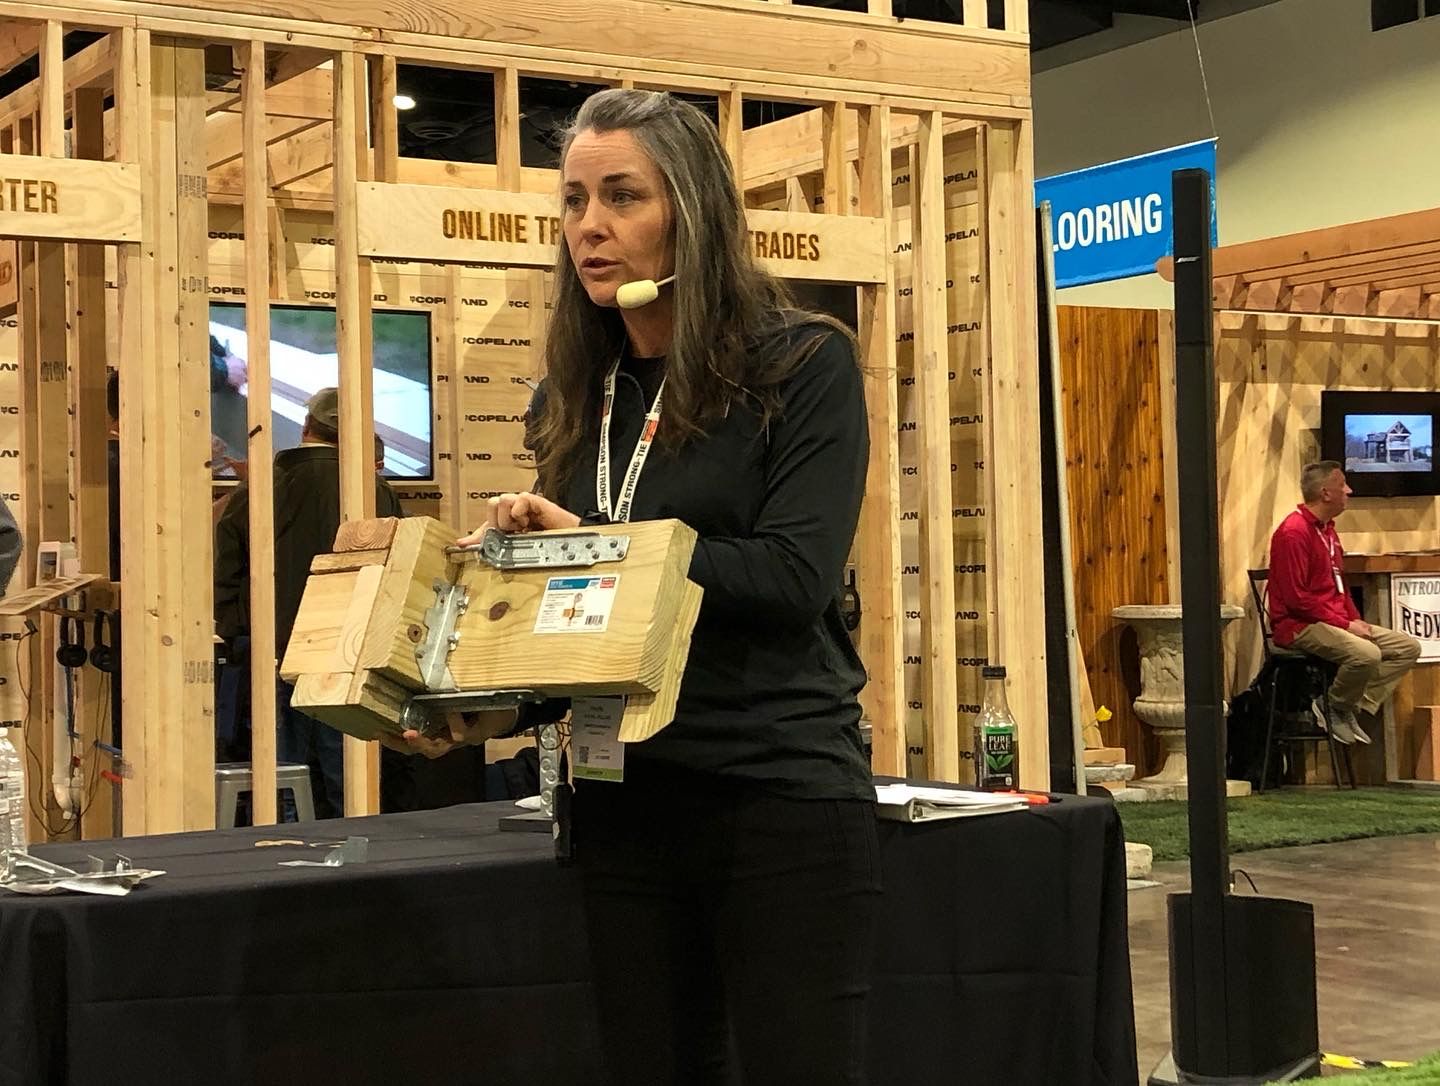 Rachel Holland at JLC Live Residential Construction Trade Show